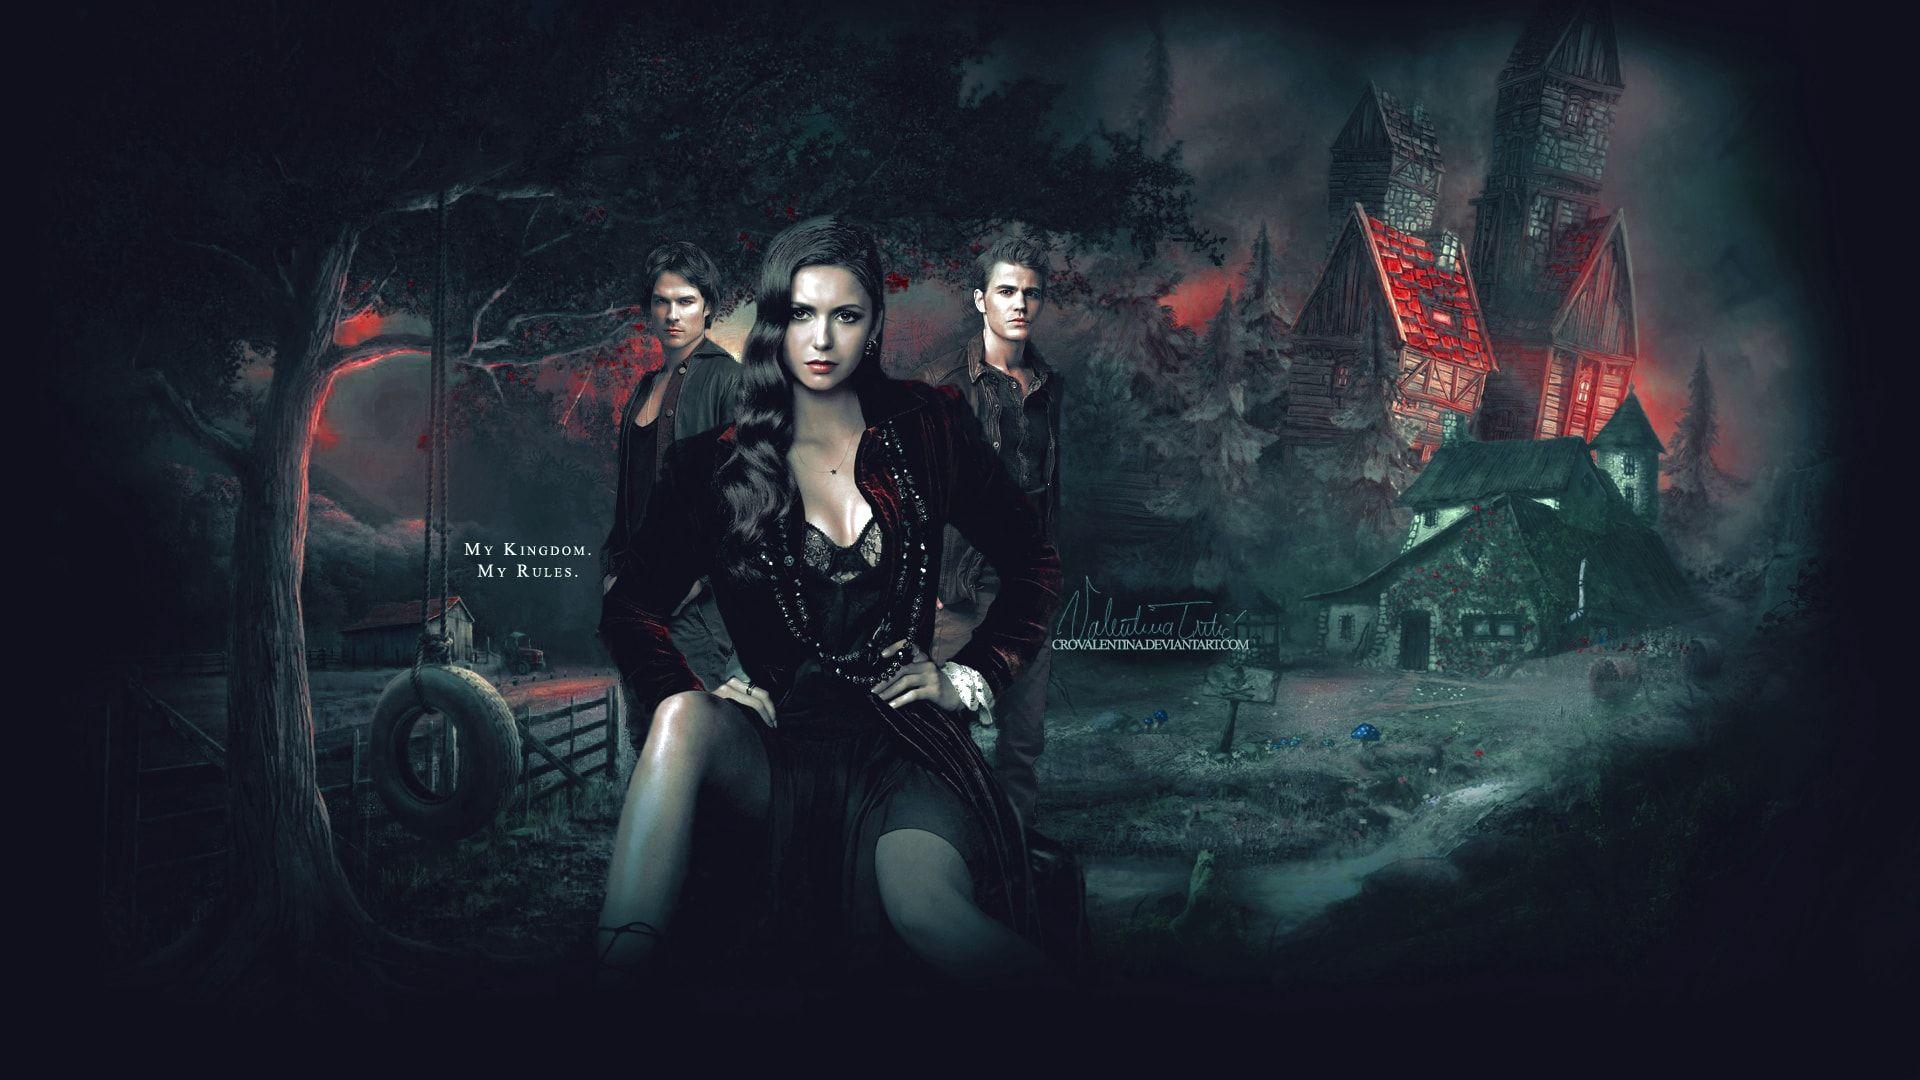 The Vampire Diaries Wallpaper Collection 2560×1440 The Vampire